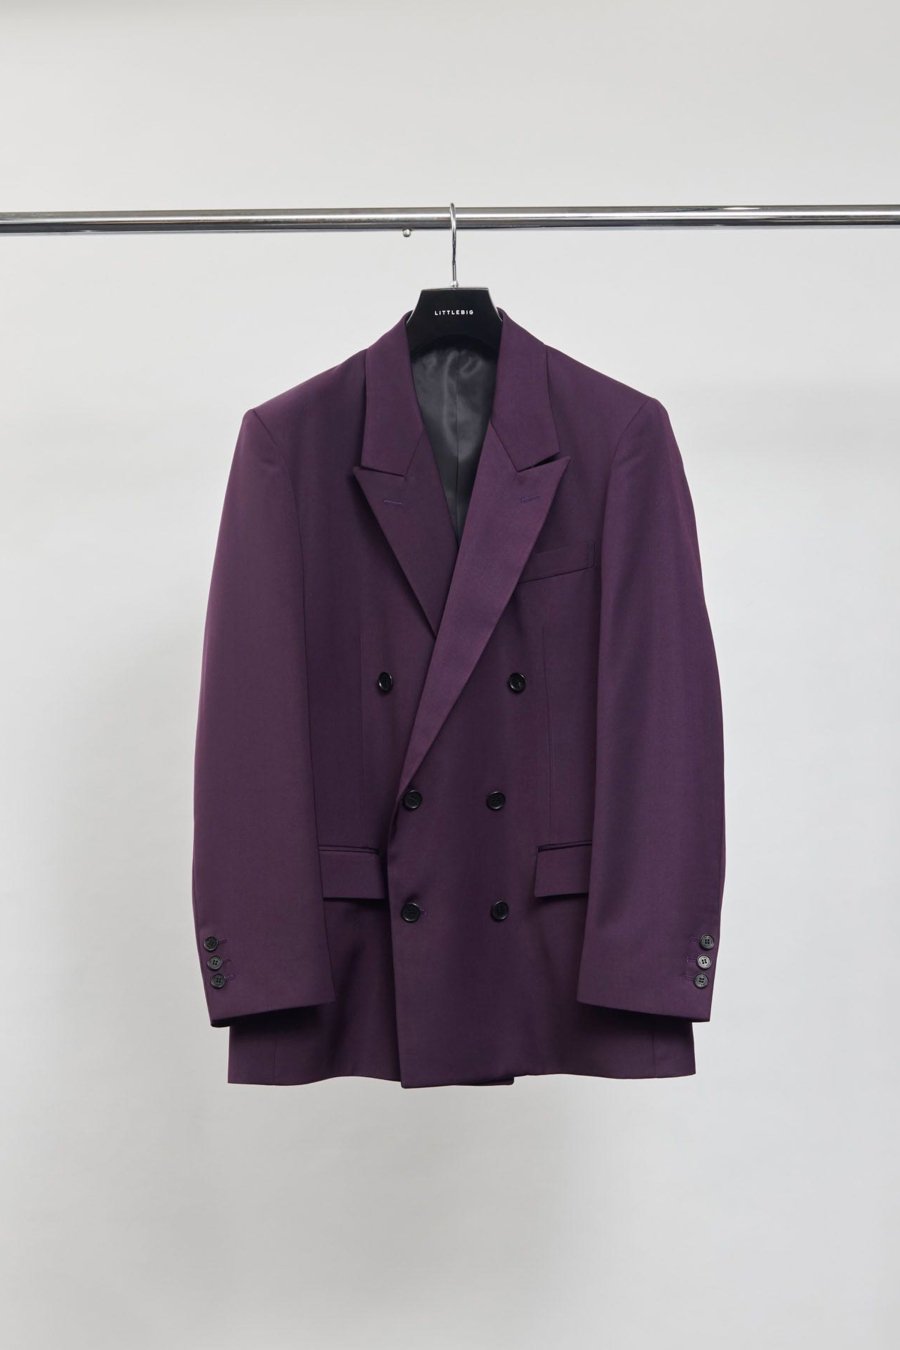 LITTLEBIG  Purple Double Jacket<img class='new_mark_img2' src='https://img.shop-pro.jp/img/new/icons15.gif' style='border:none;display:inline;margin:0px;padding:0px;width:auto;' />